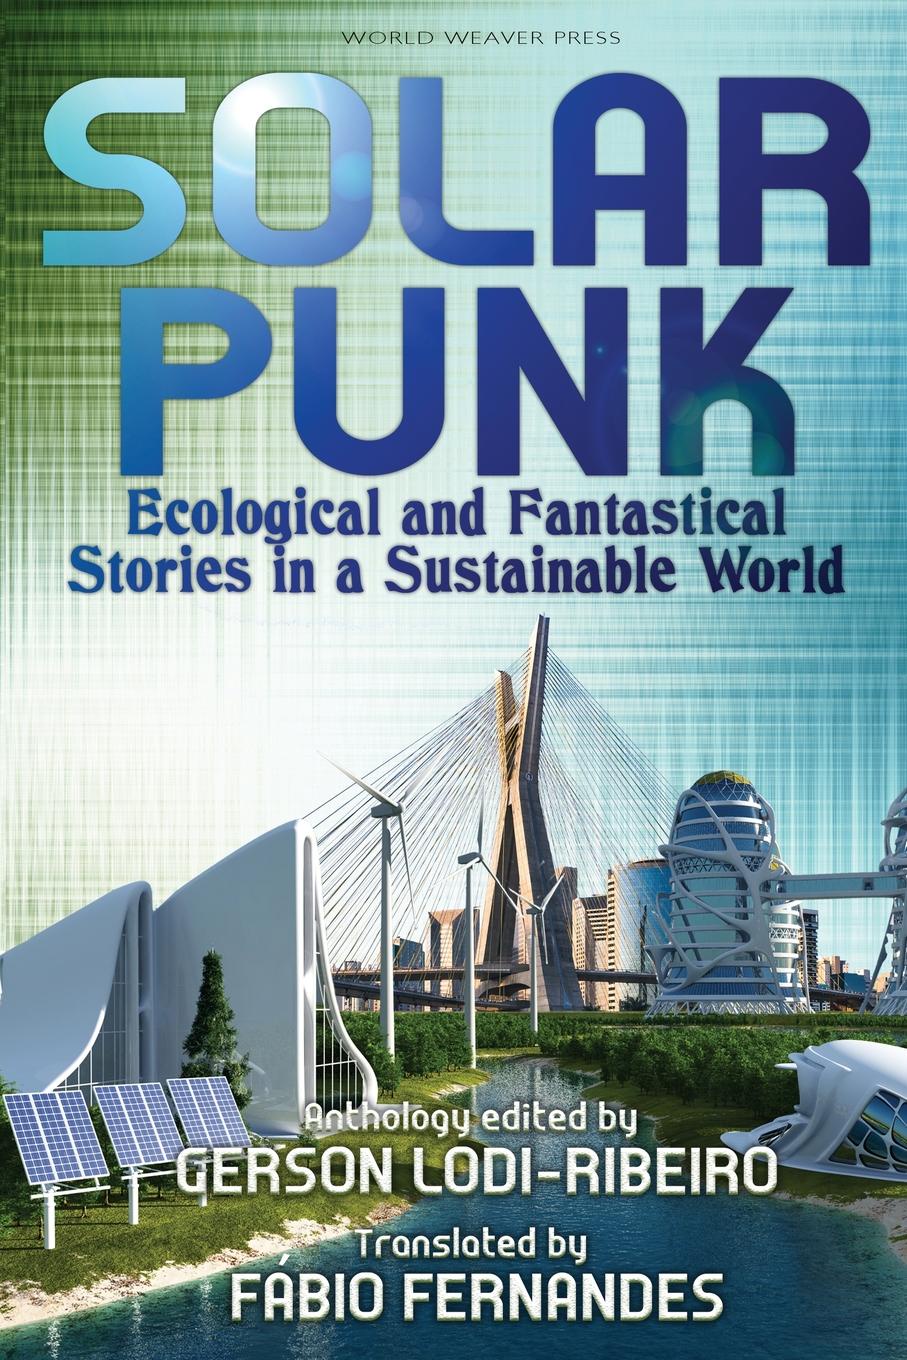 фото Solarpunk. Ecological and Fantastical Stories in a Sustainable World